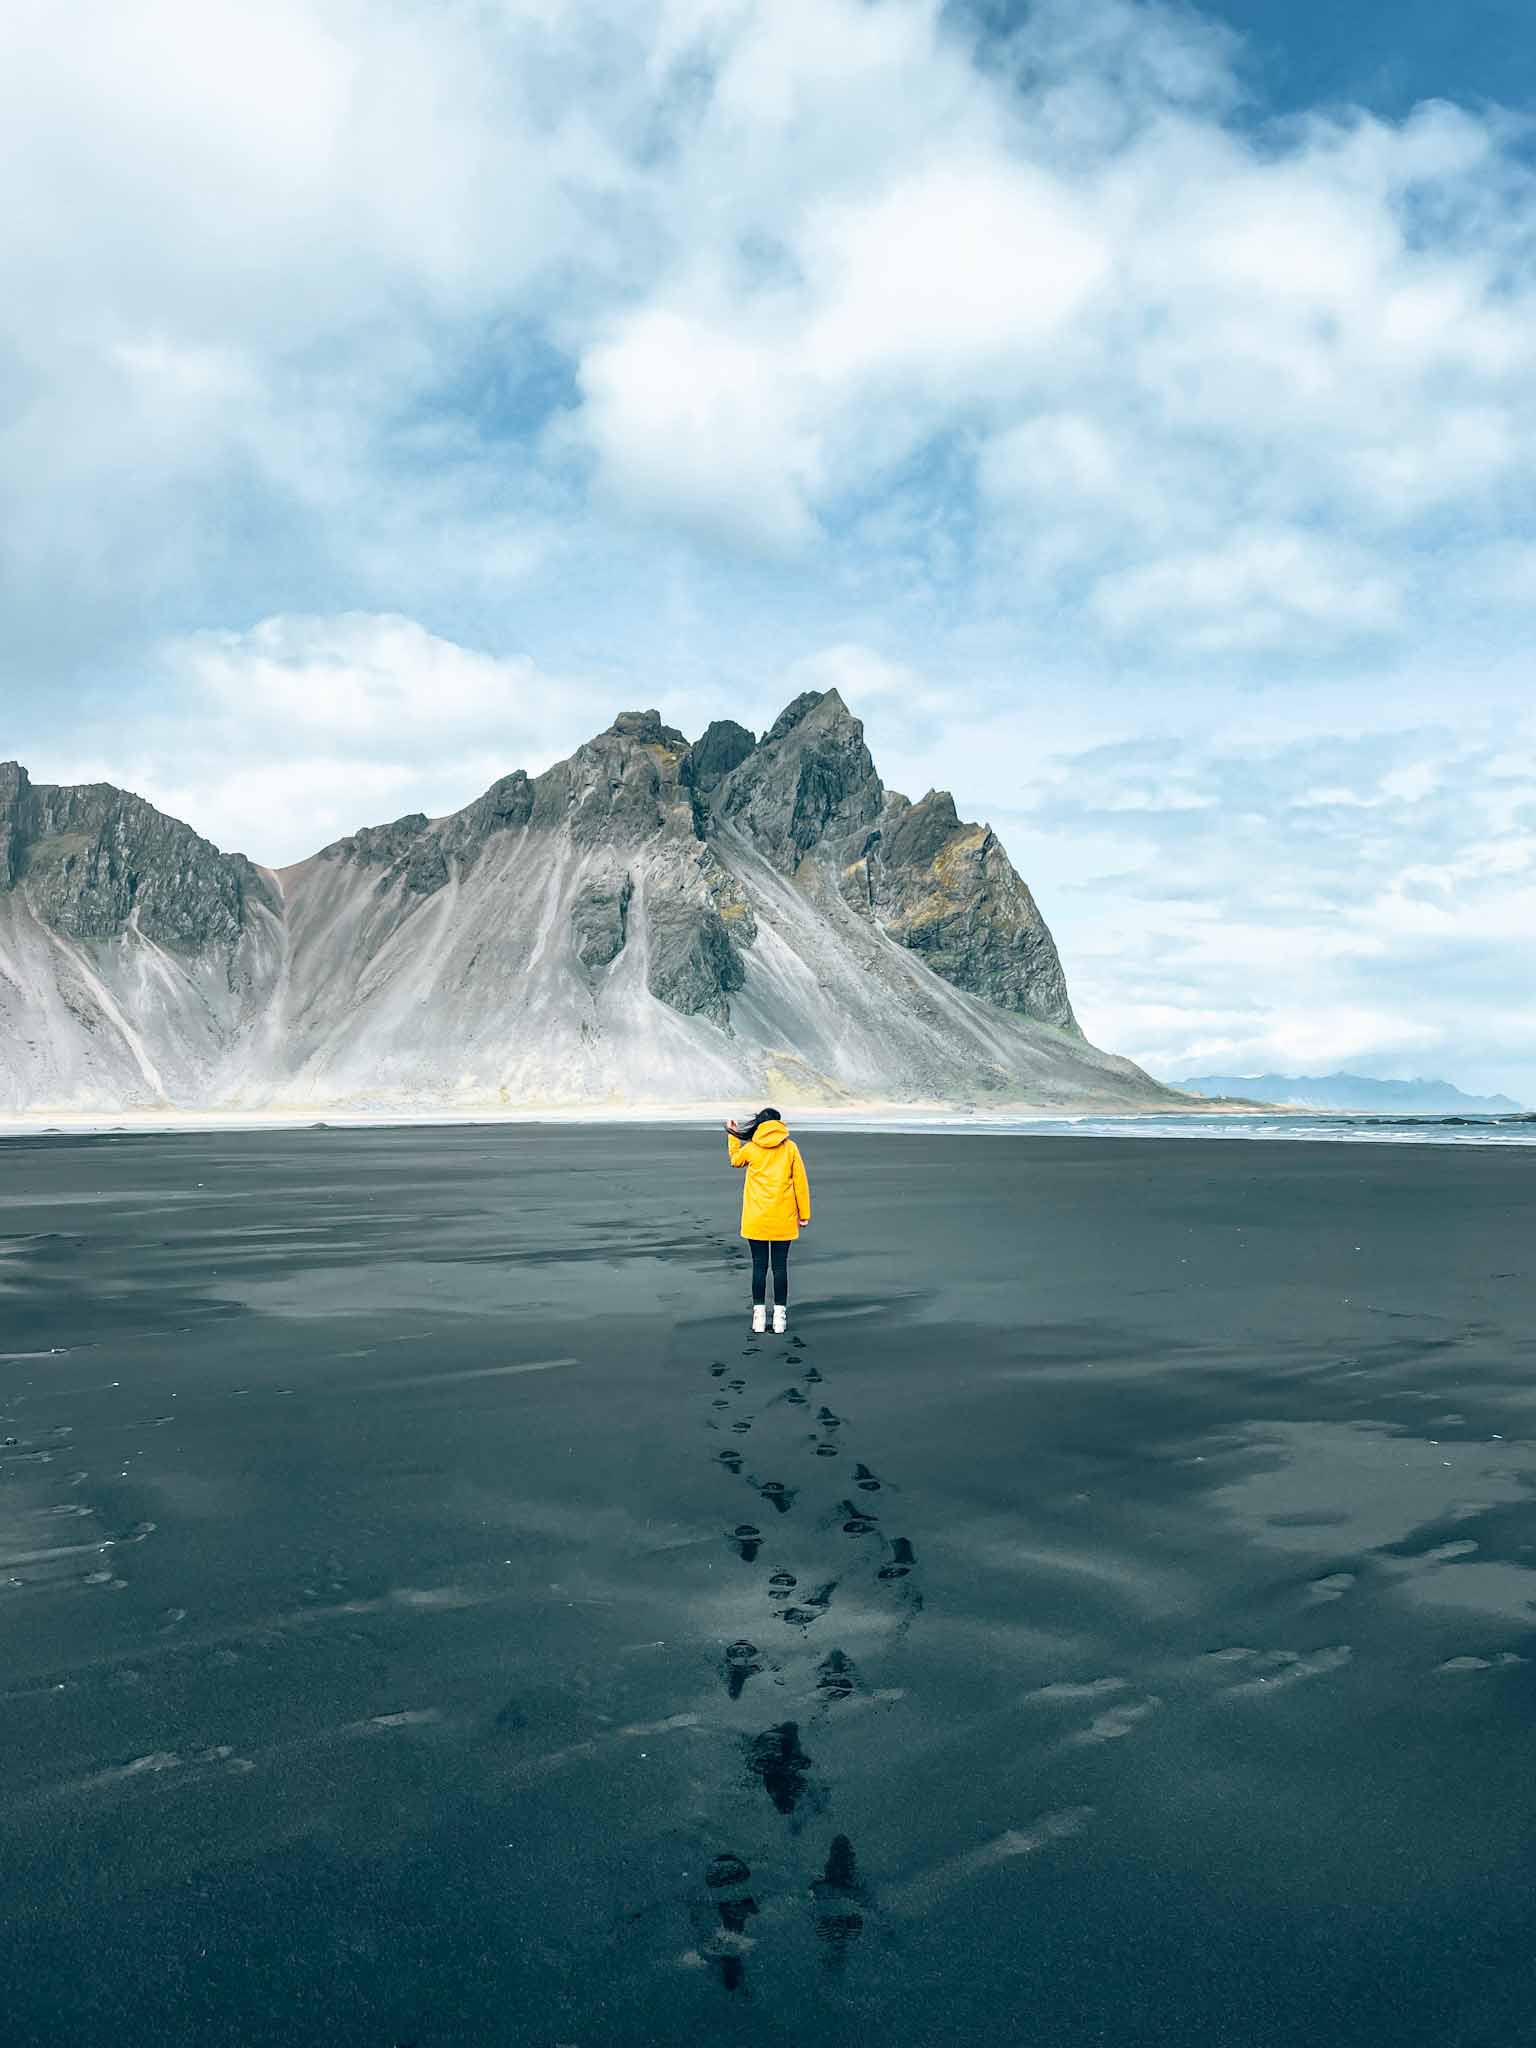 Iceland Instagram spots - Stokksnes beach and the Vestrahorn mountain - beautiful beaches in Iceland